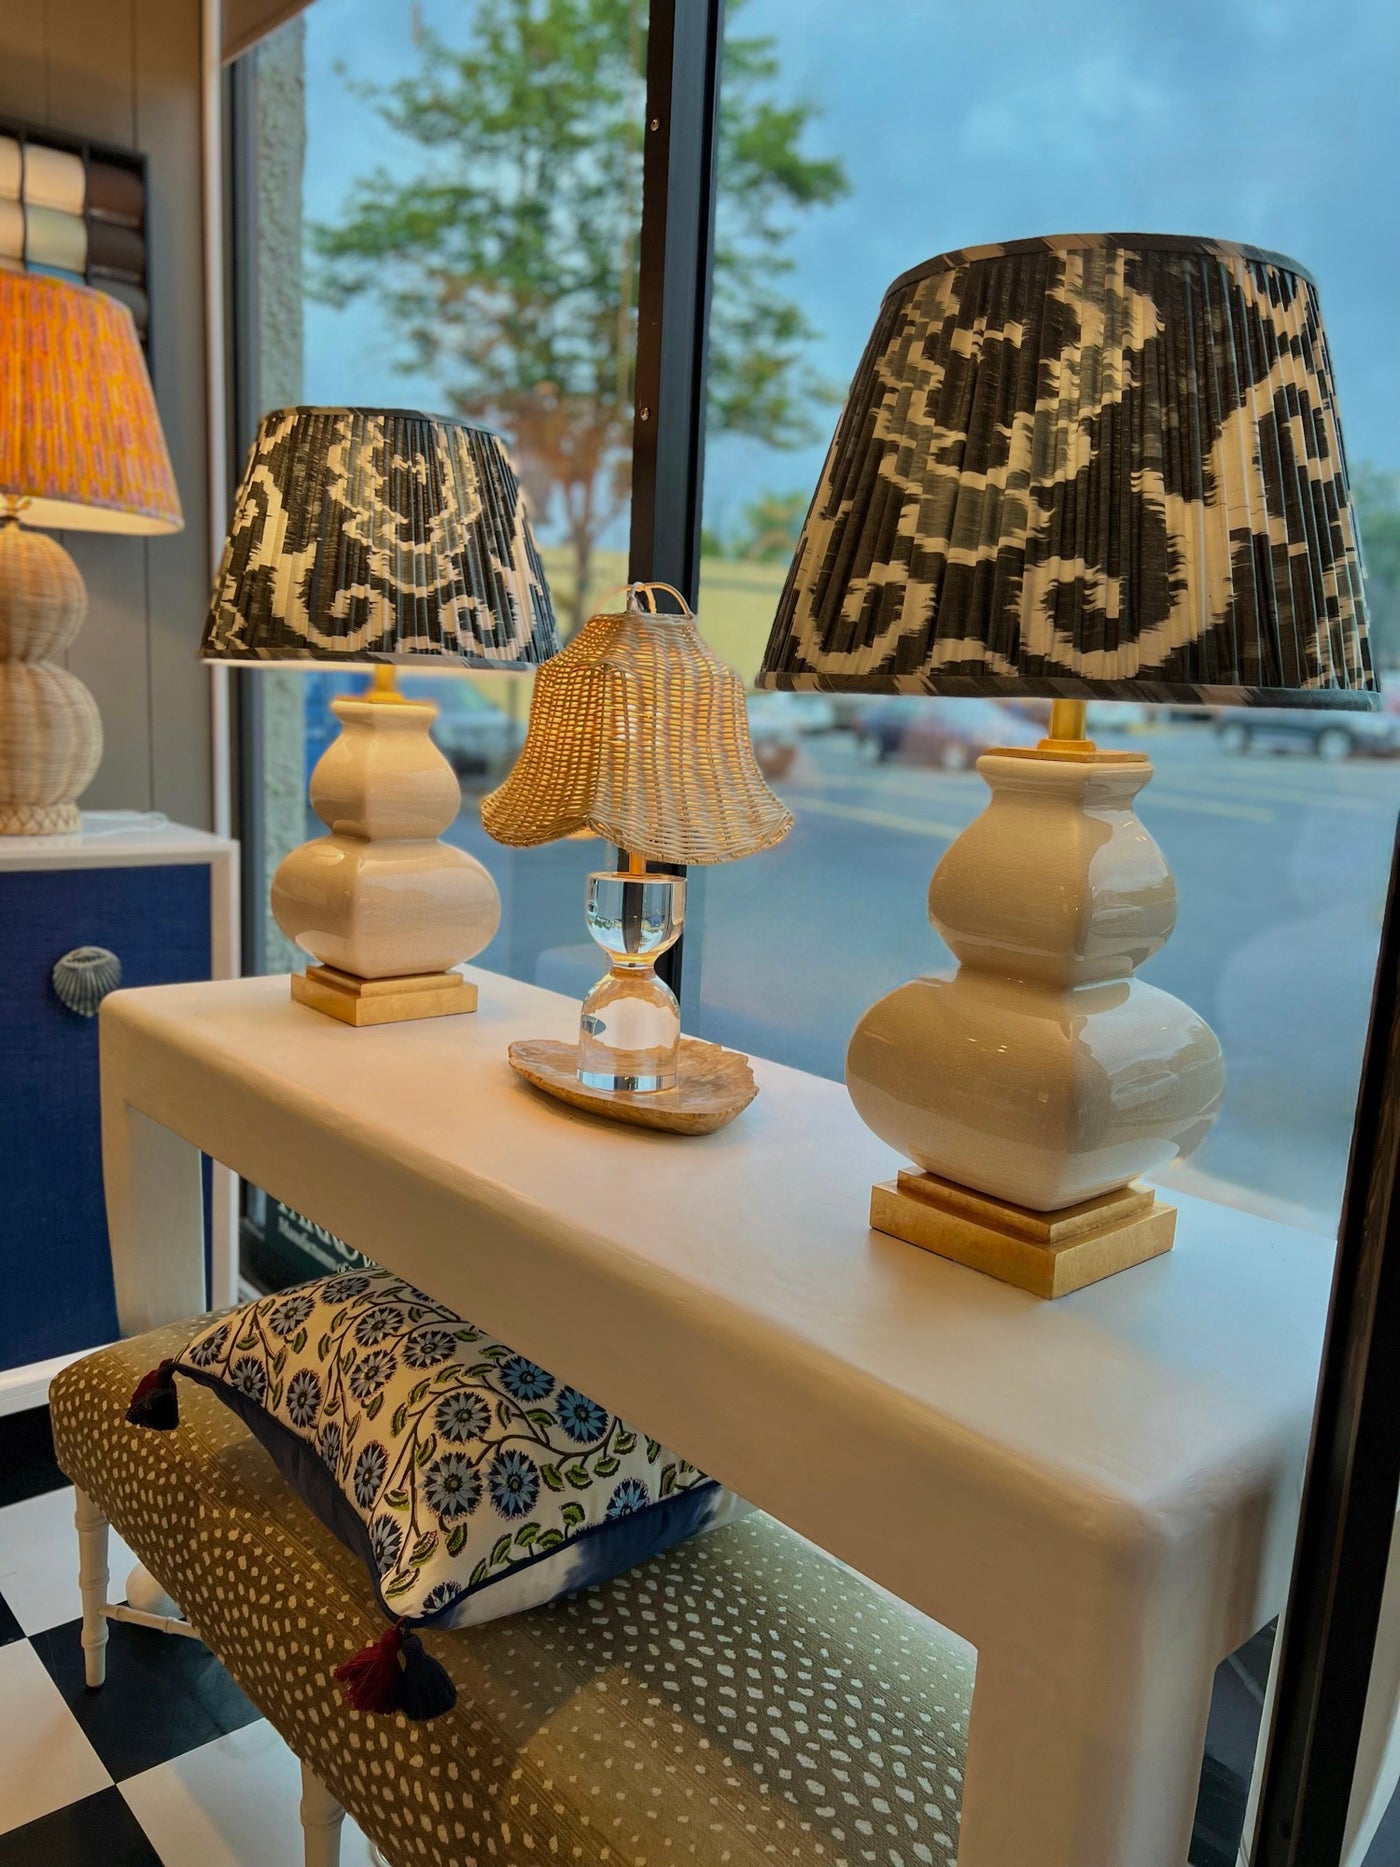 Grey and white ikat lampshades on ivory lamps